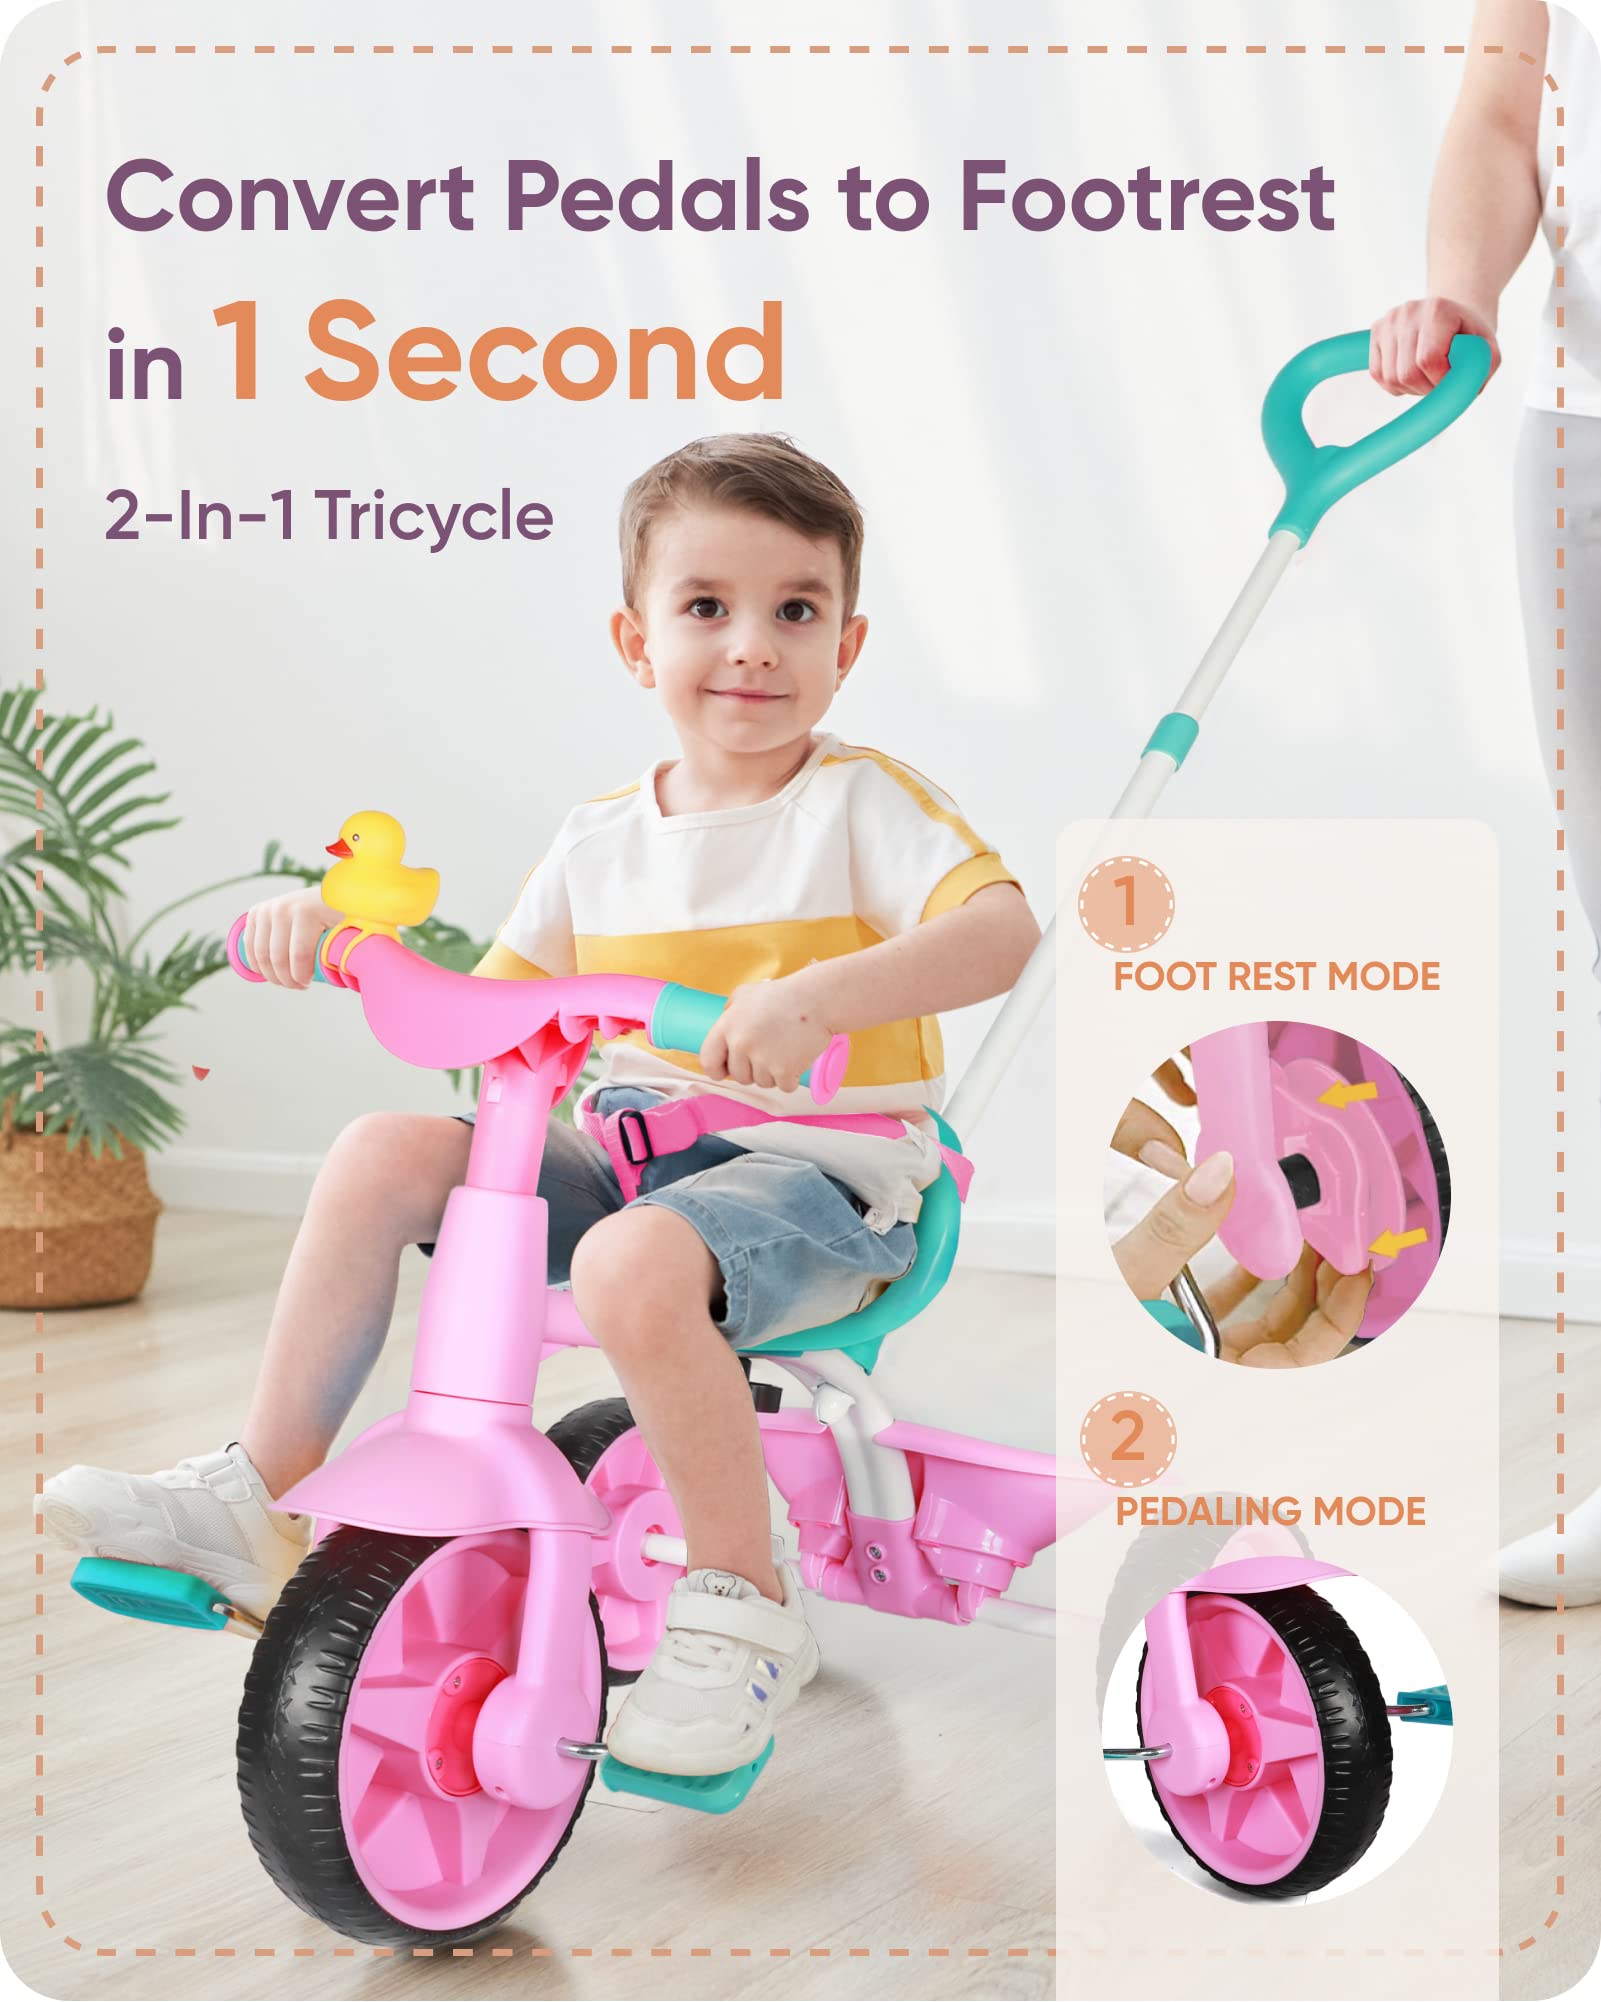 KRIDDO 2 in 1 Kids Tricycles Age 18 Month to 3 Years, Gift Toddler Trikes for Toddlers with Push Handle and Duck Bell, Pink